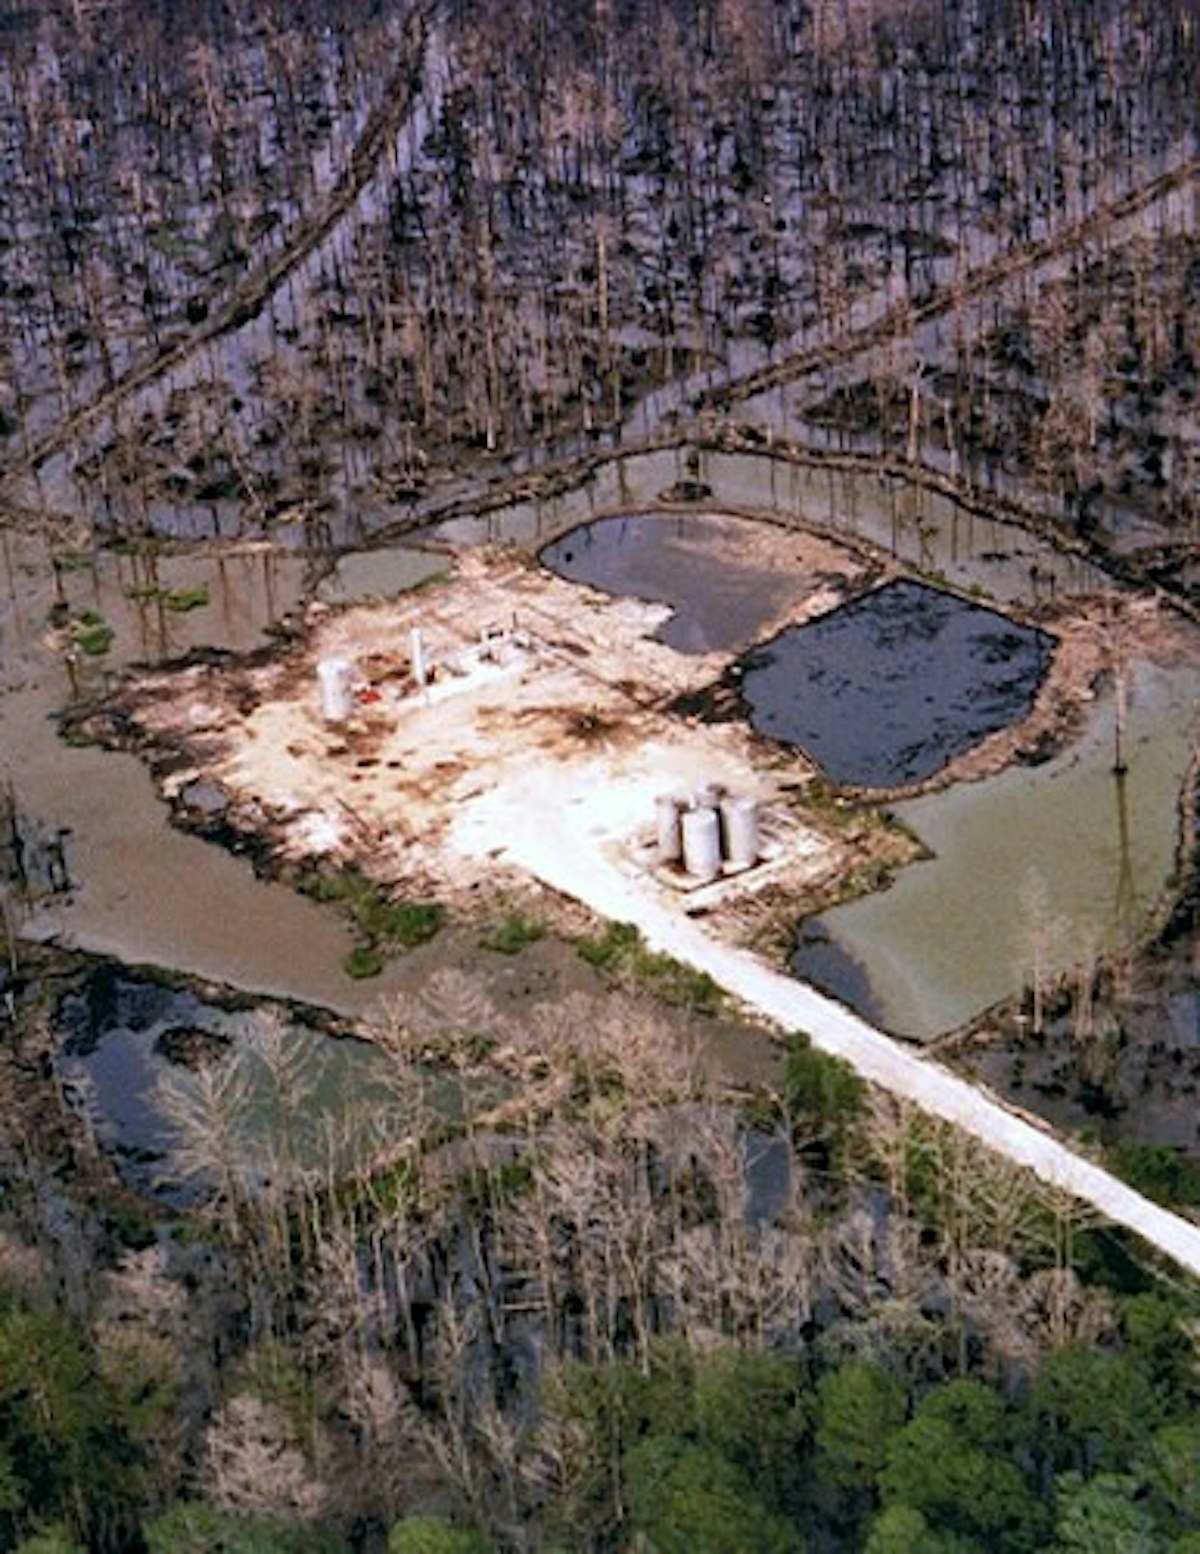 Contamination at an oilfield site